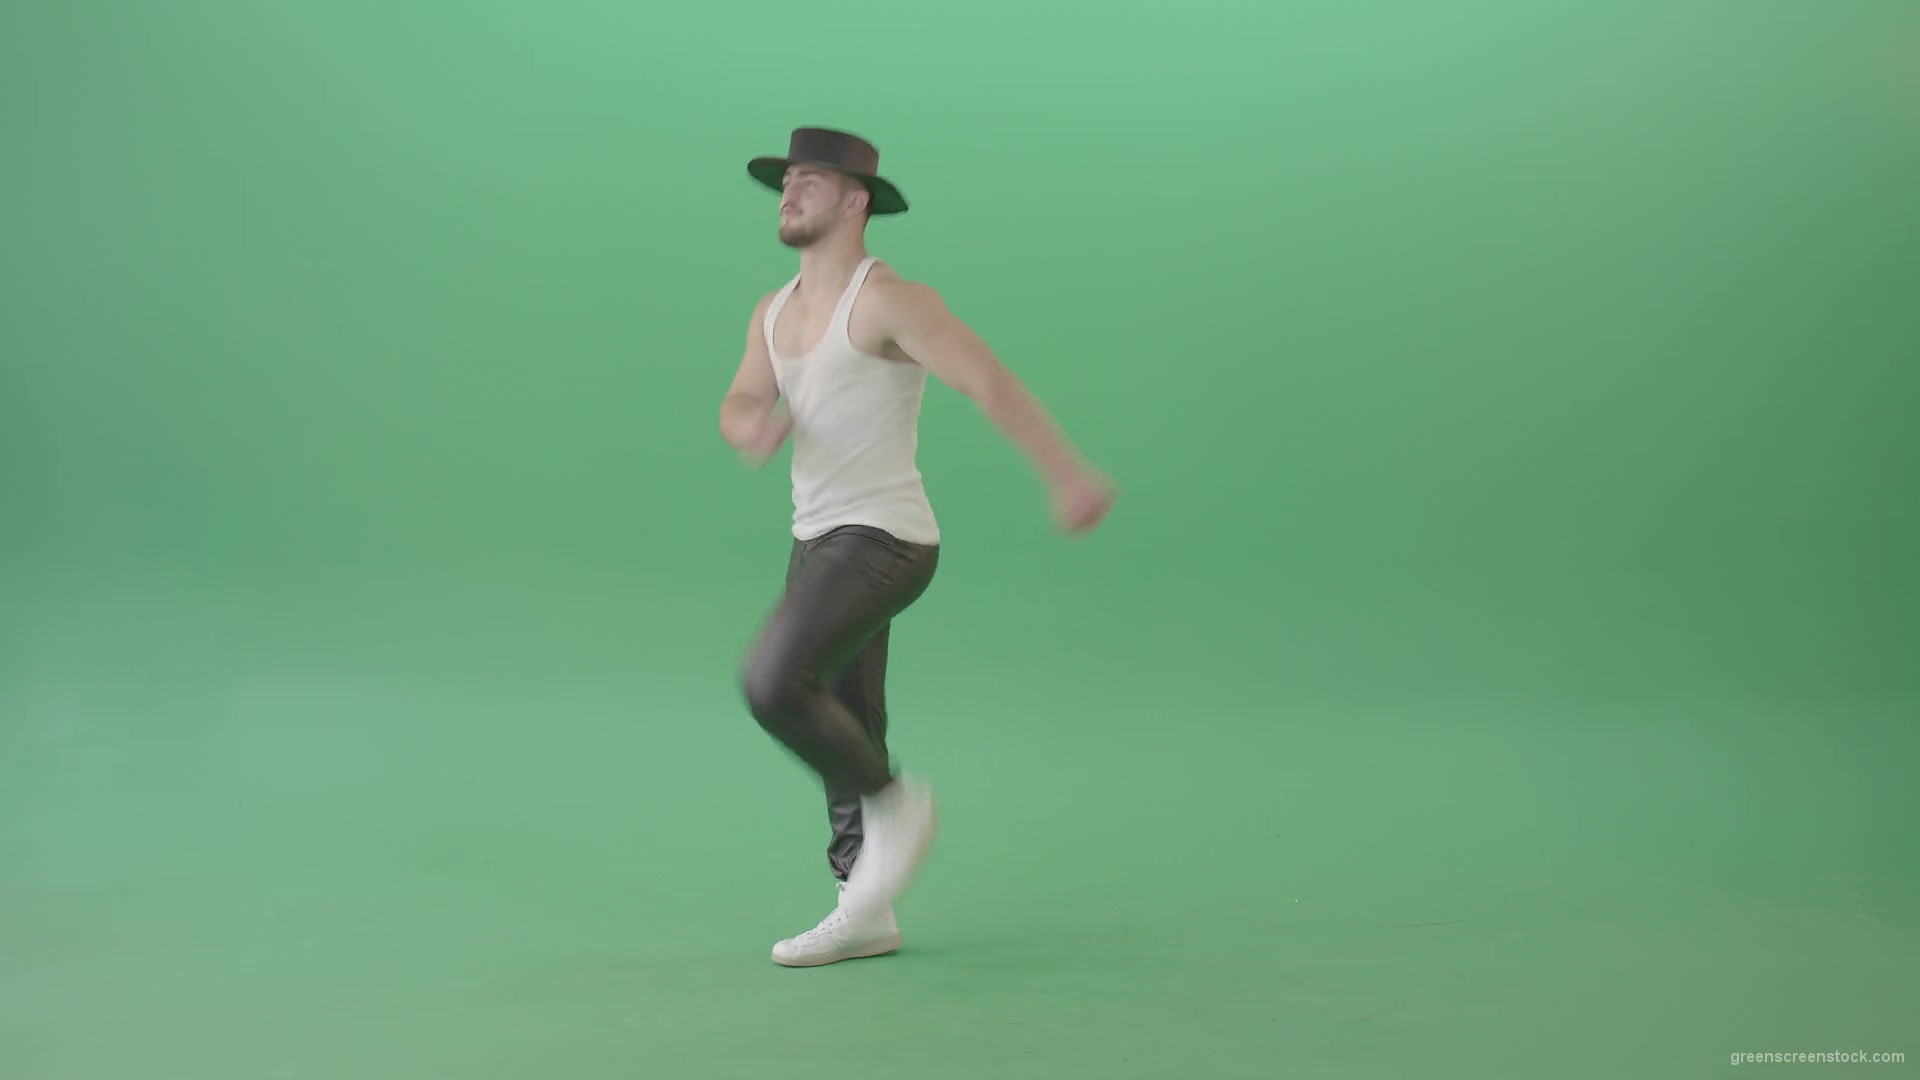 Sport-Man-in-black-hat-dancing-and-marching-fast-isolated-over-Green-Screen-4K-Video-Footage-1920_007 Green Screen Stock